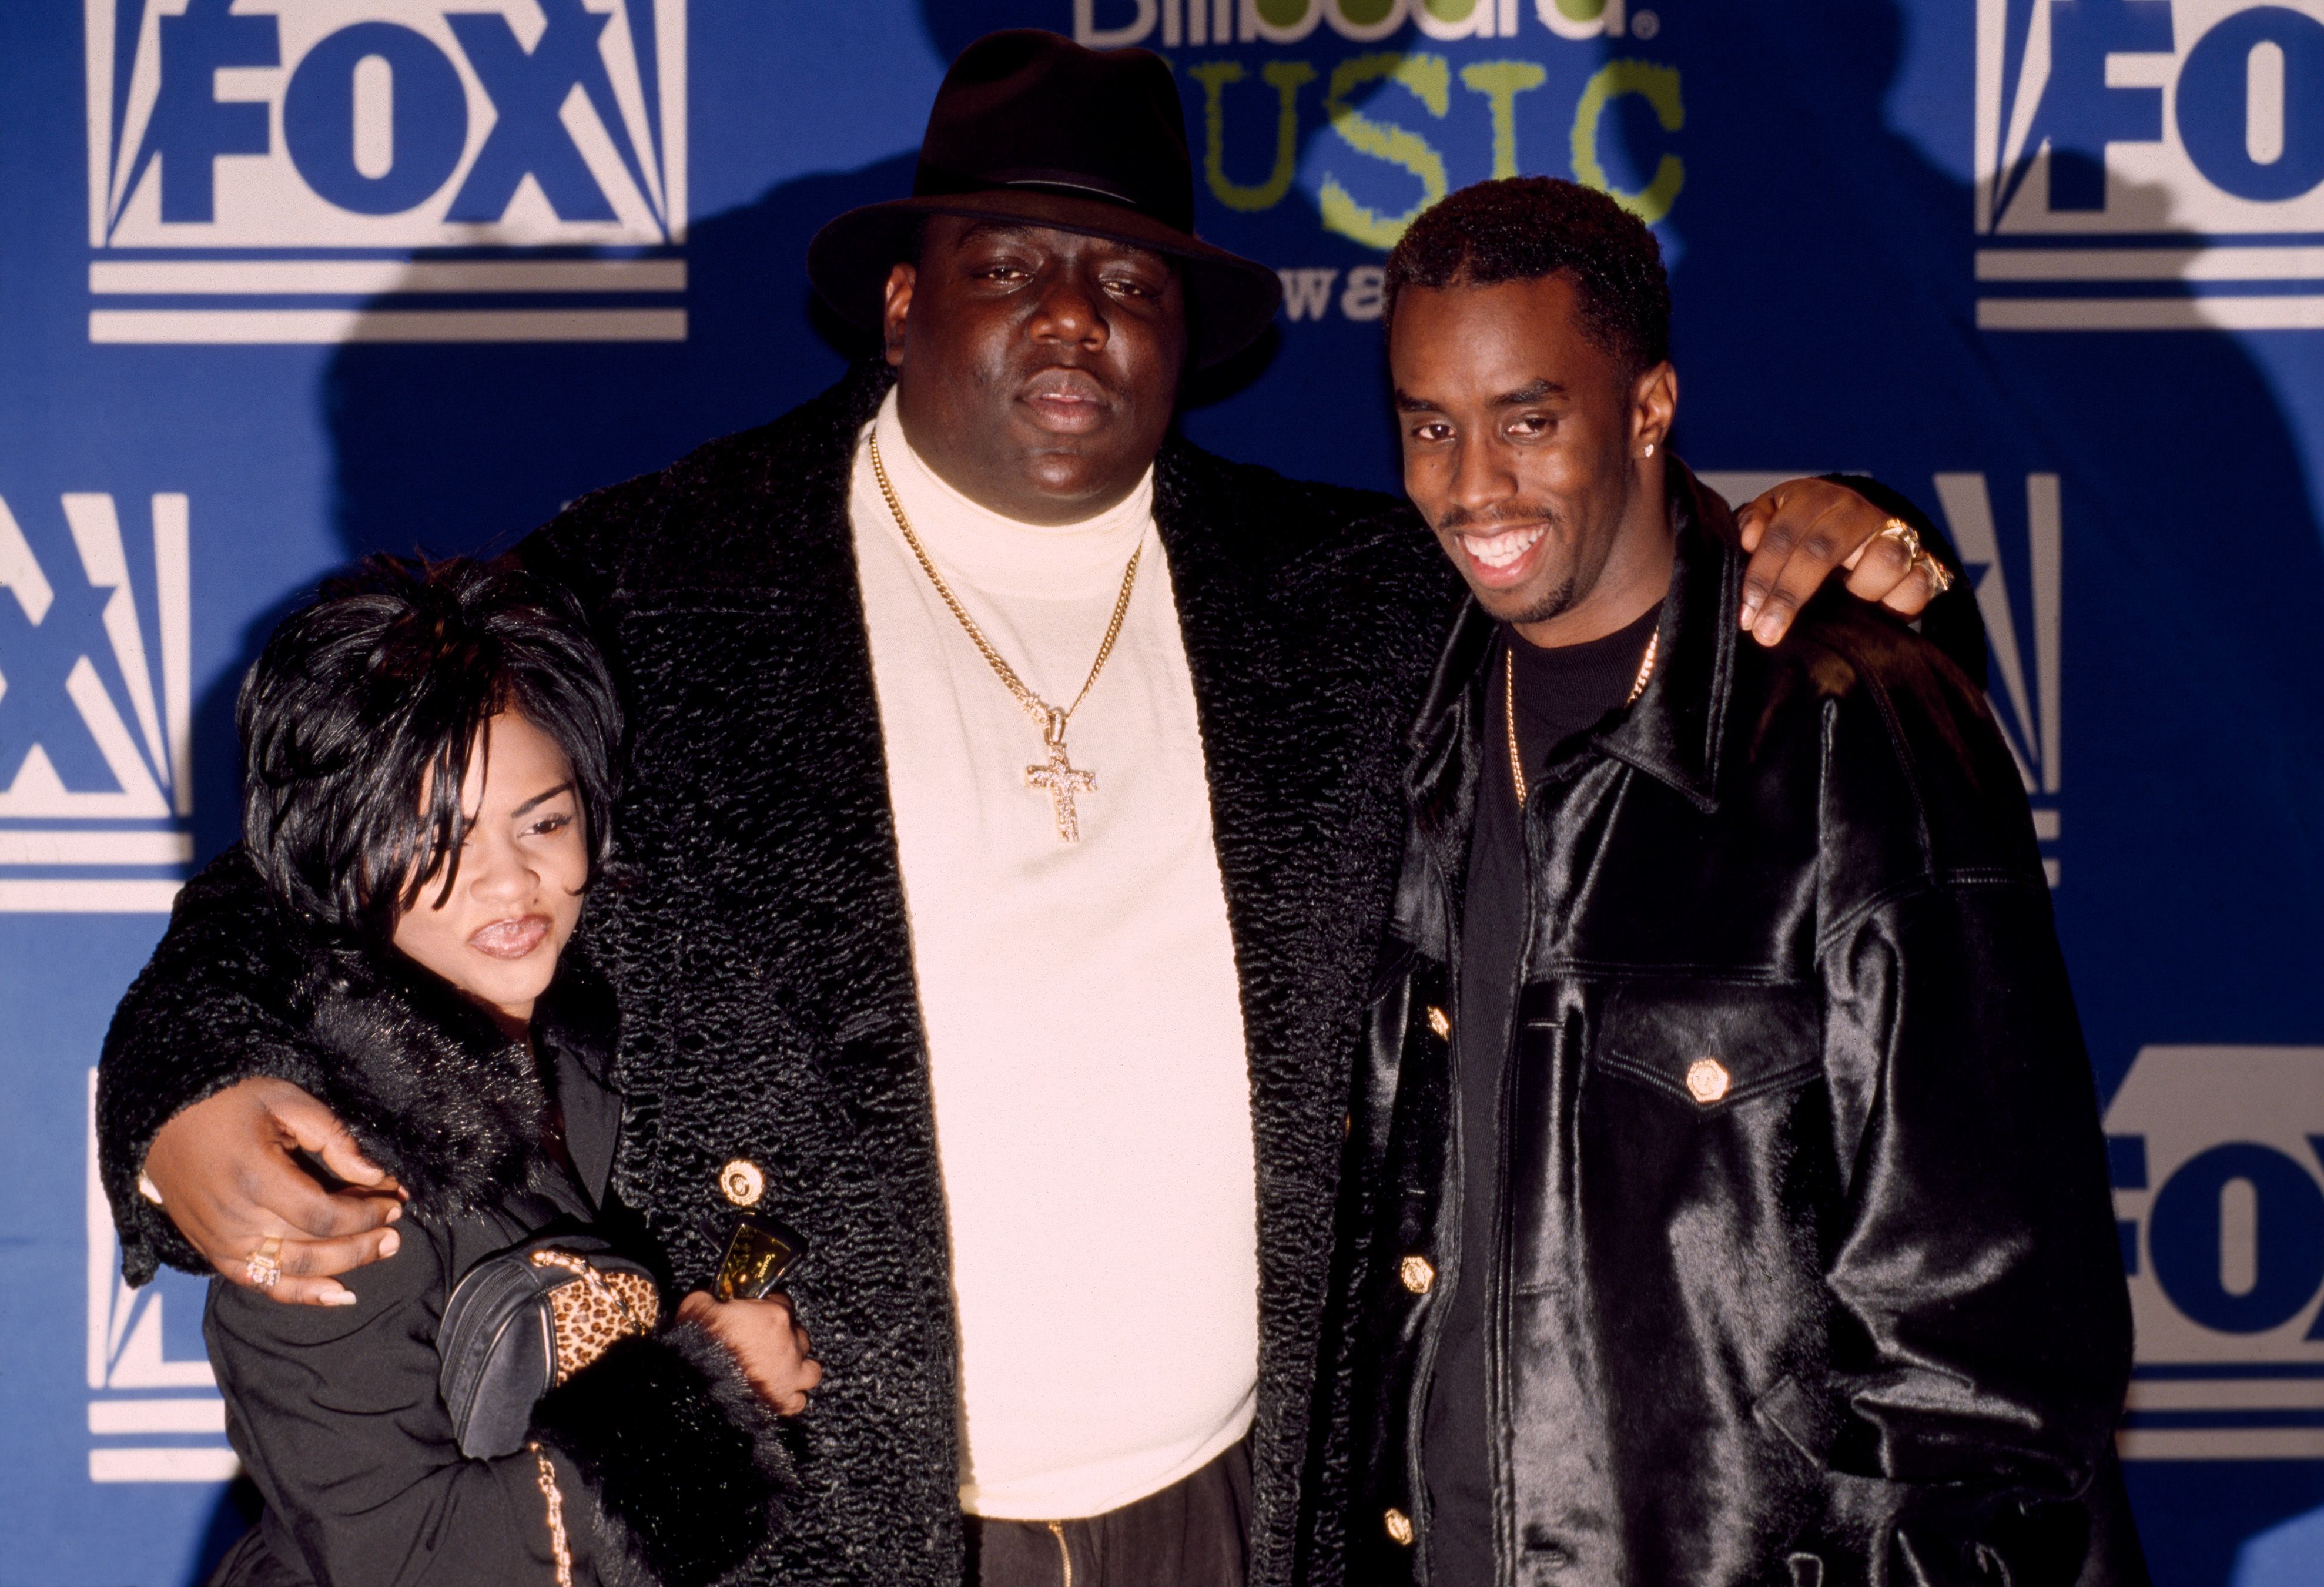 Sean Combs: Biography, Music Producer, Musician, Diddy, Puffy